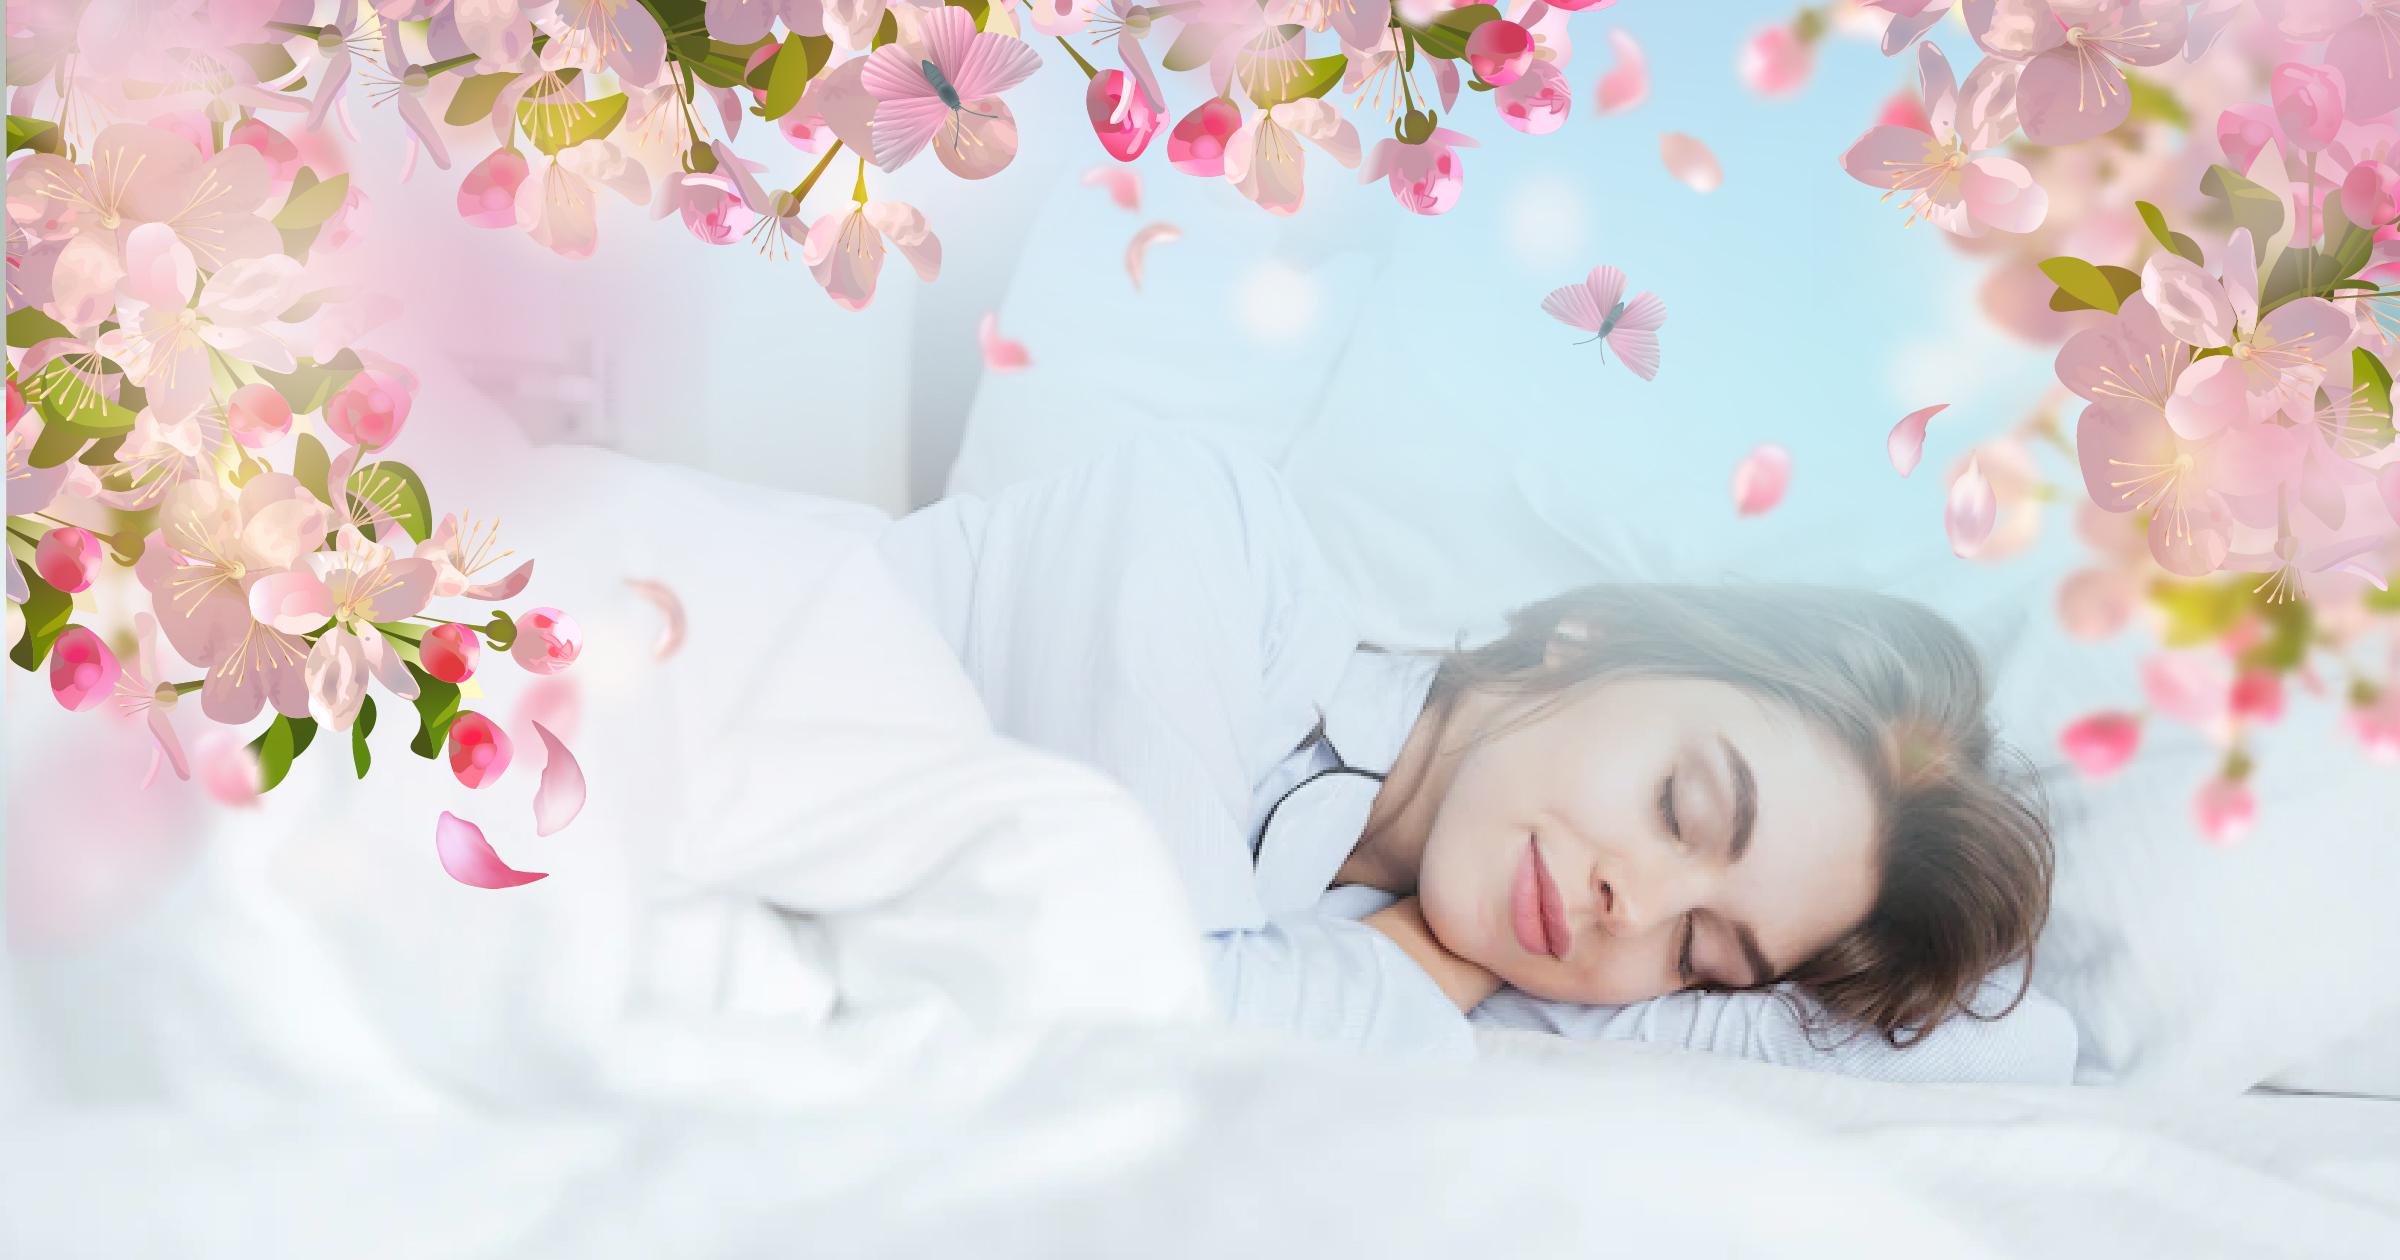 5 EFFECTIVE WAYS TO SLEEP WELL DURING THE TET HOLIDAY